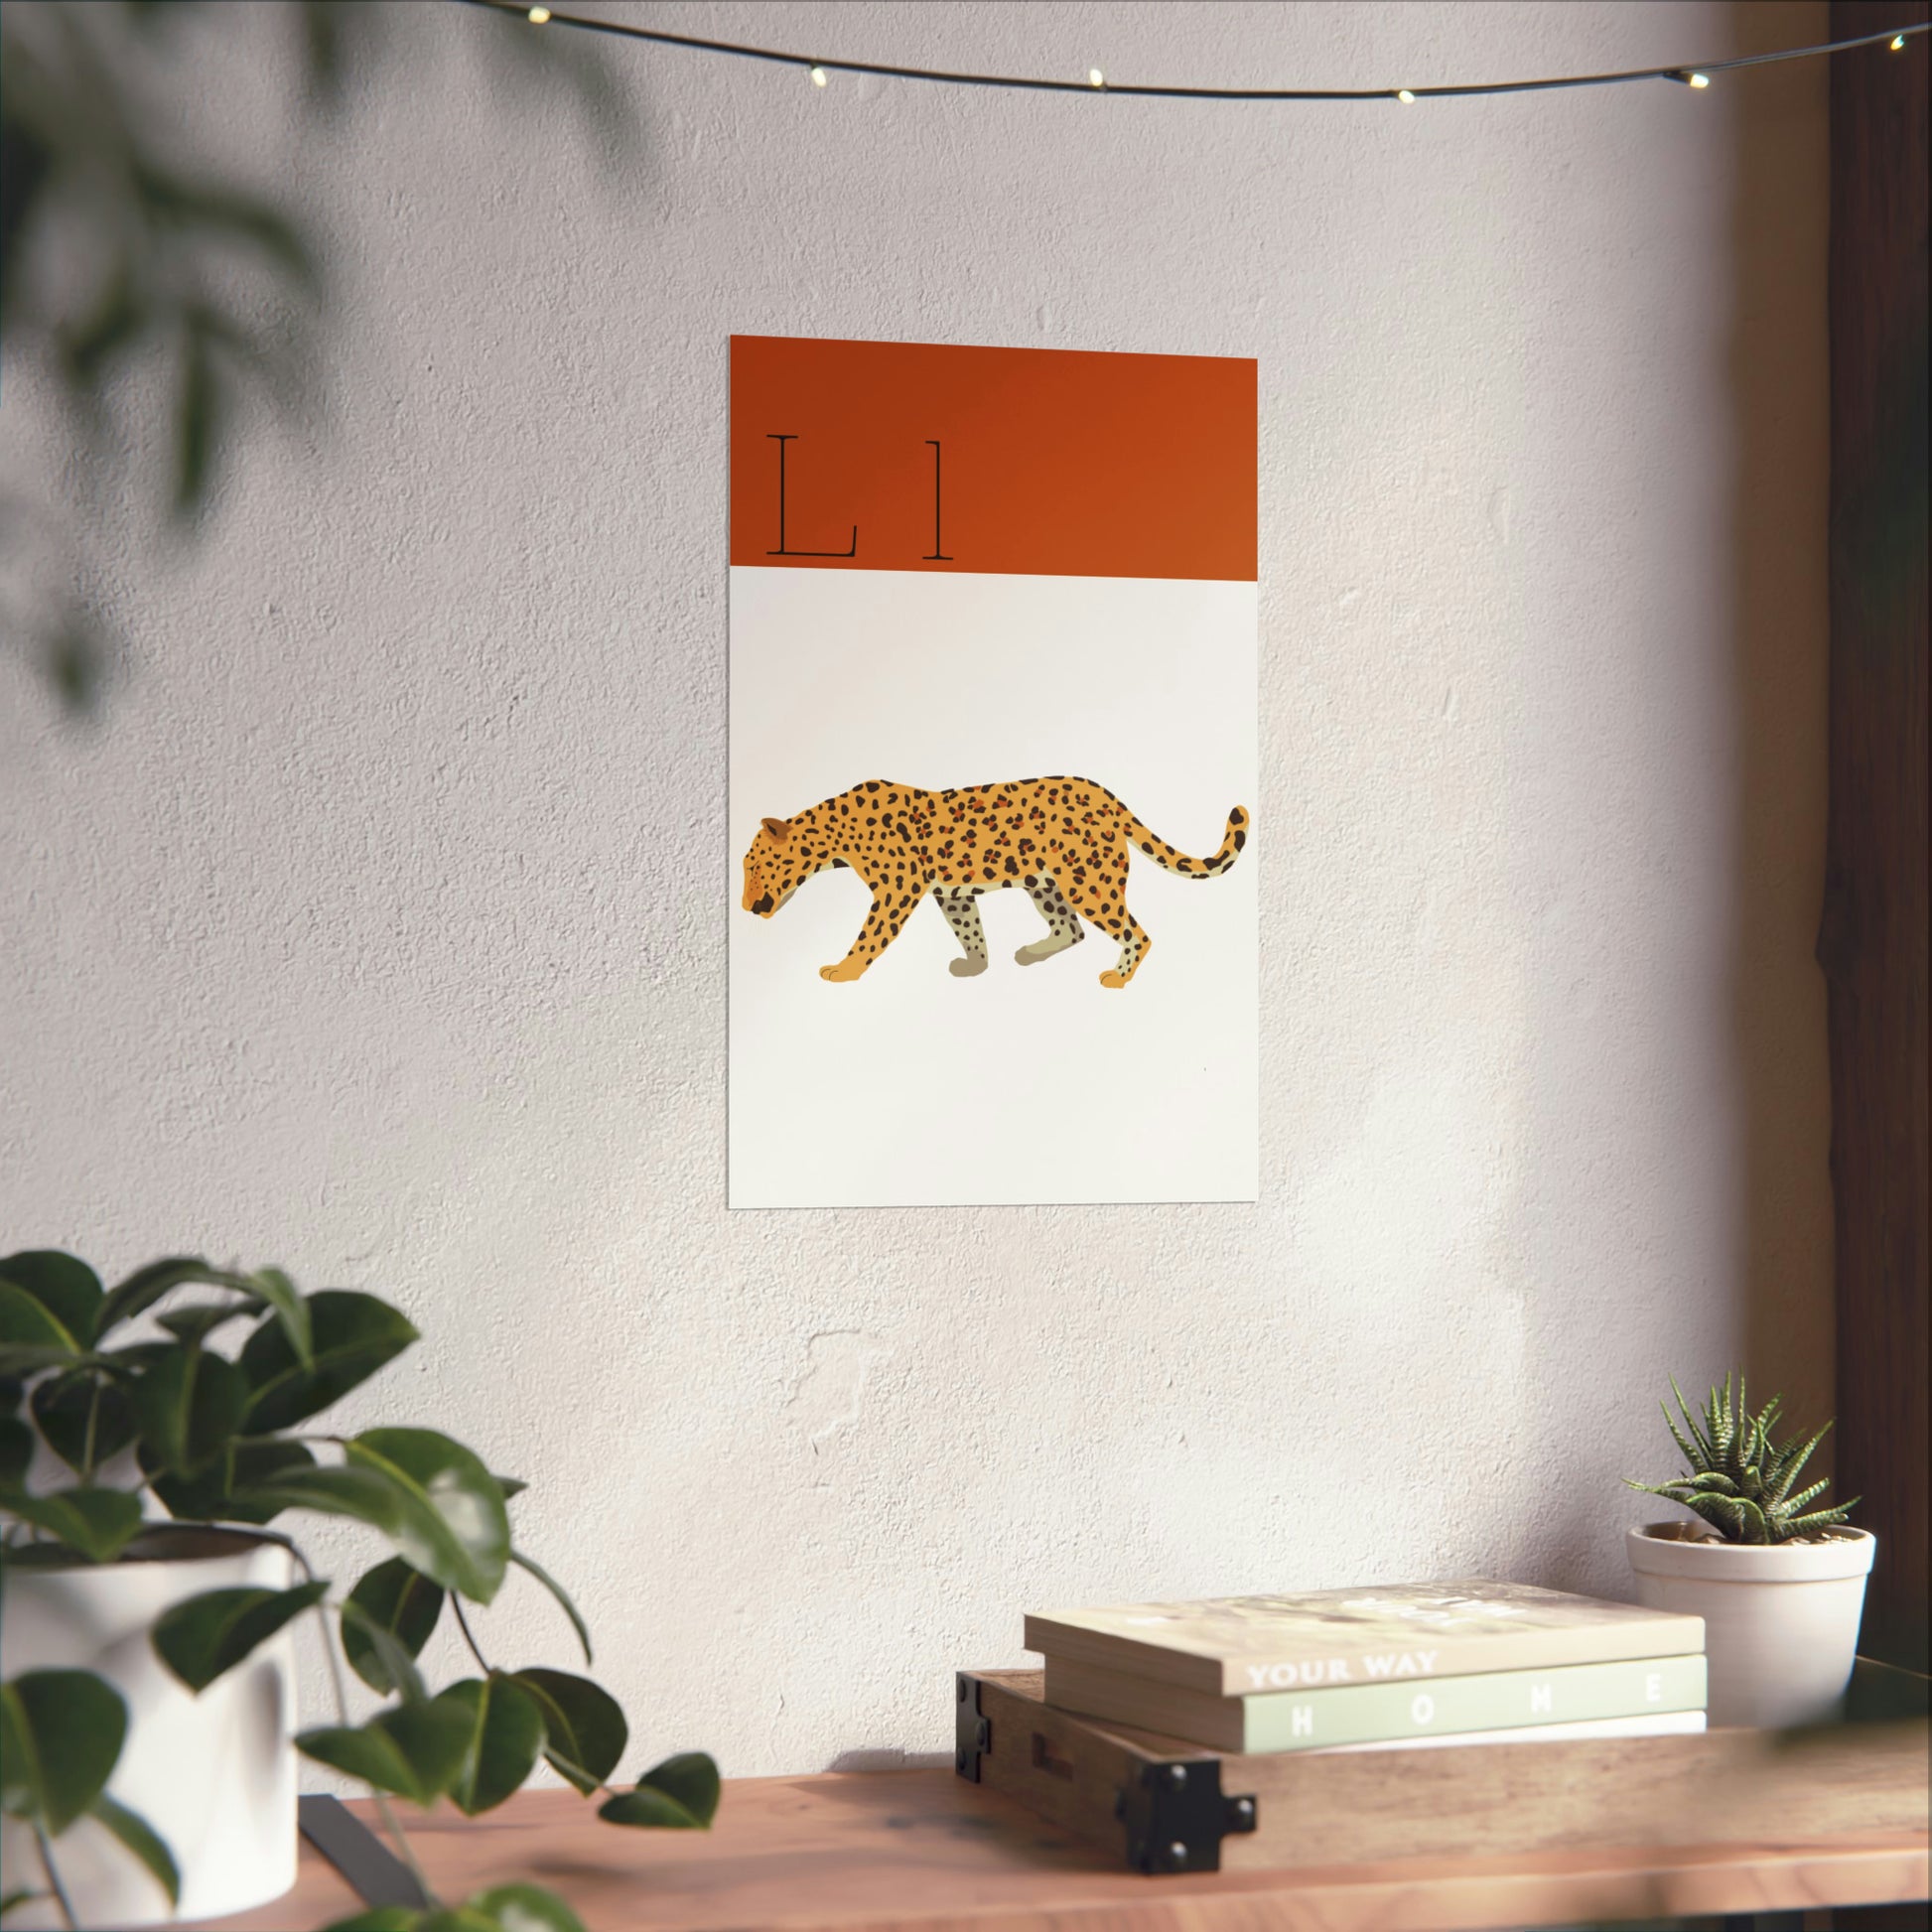 Leopard Poster on White Wall With a Plant and Books